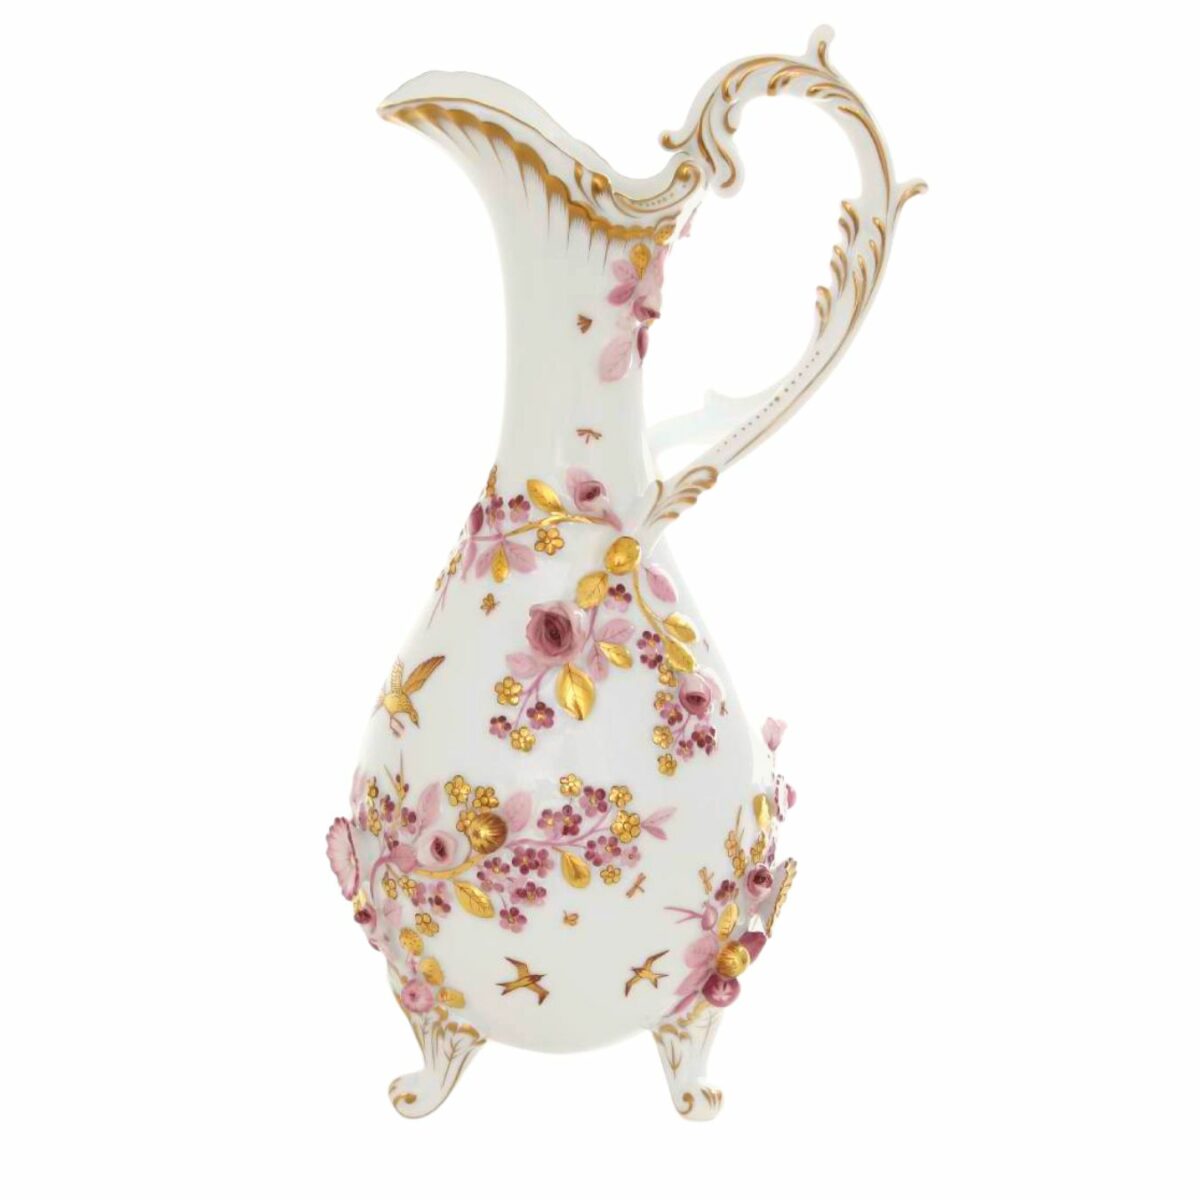 Herend-Jug-with -flowers-07598066CD1